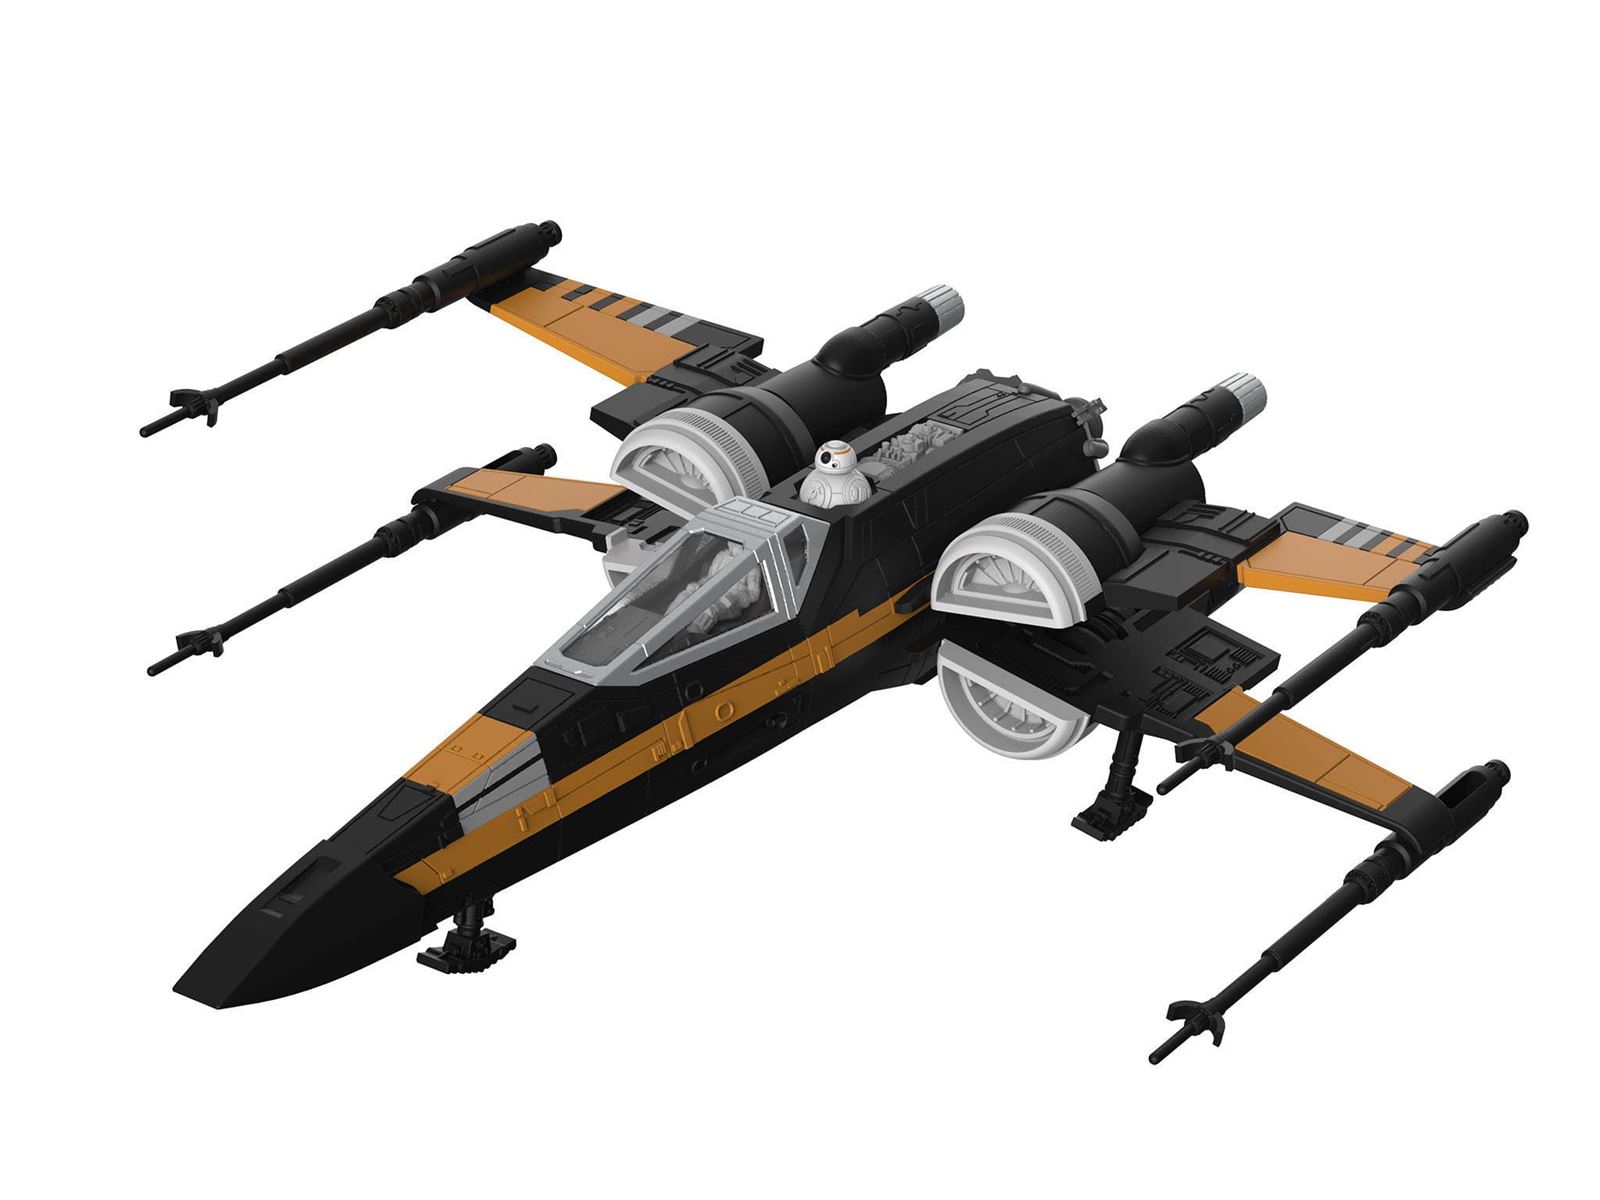 1/78 Poe's Boosted X-wing Fighter - Imagen 2